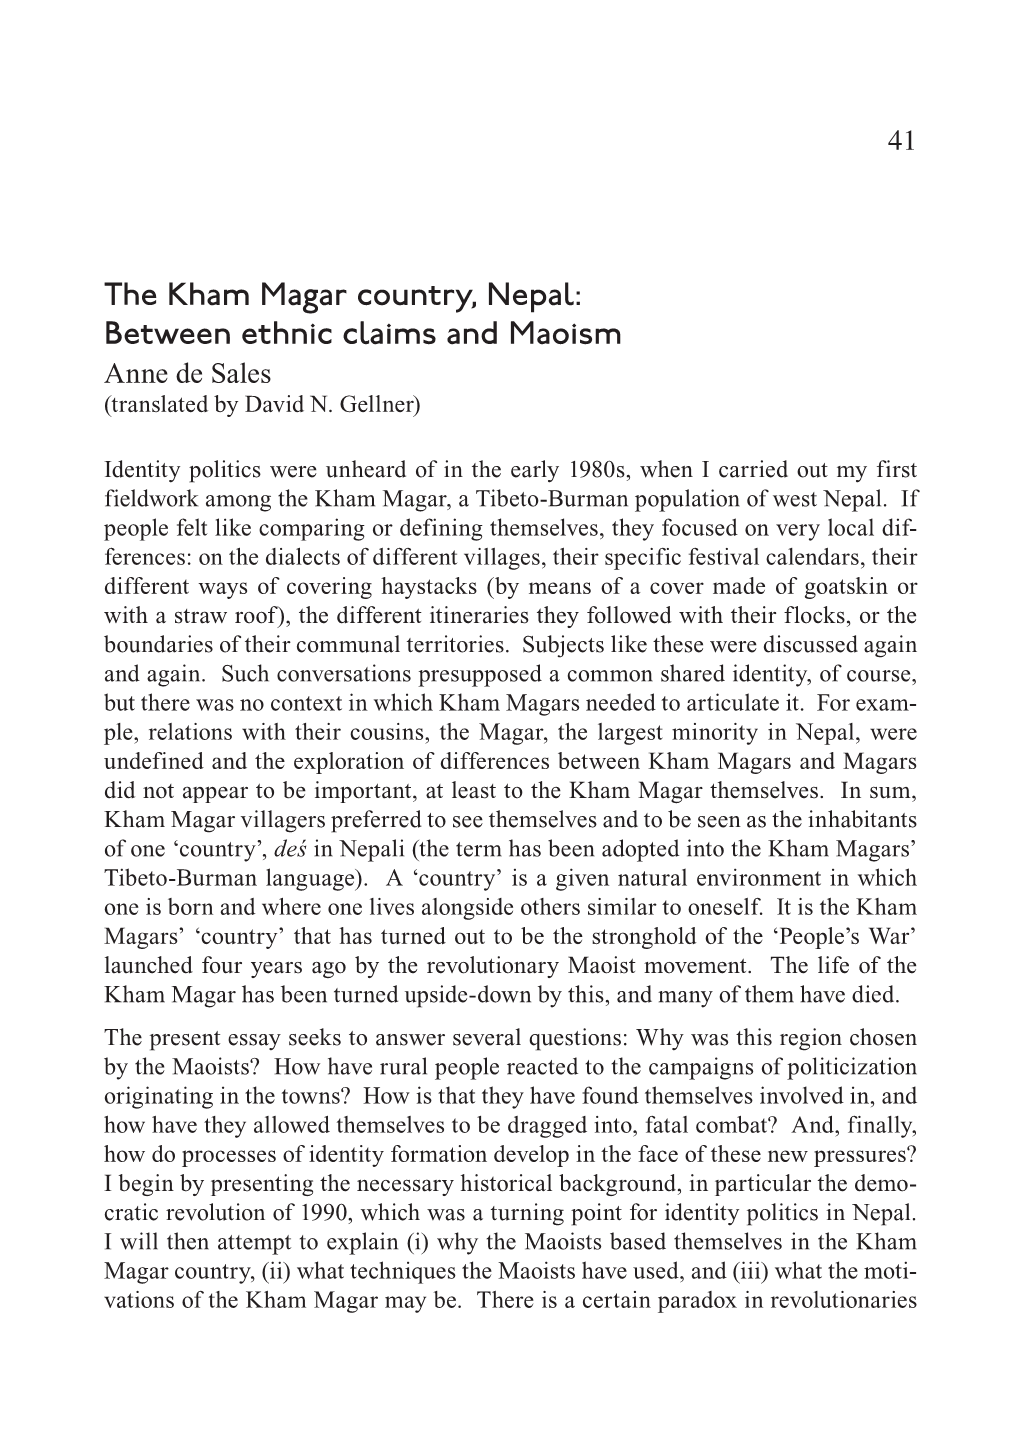 The Kham Magar Country, Nepal: Between Ethnic Claims and Maoism Anne De Sales (Translated by David N